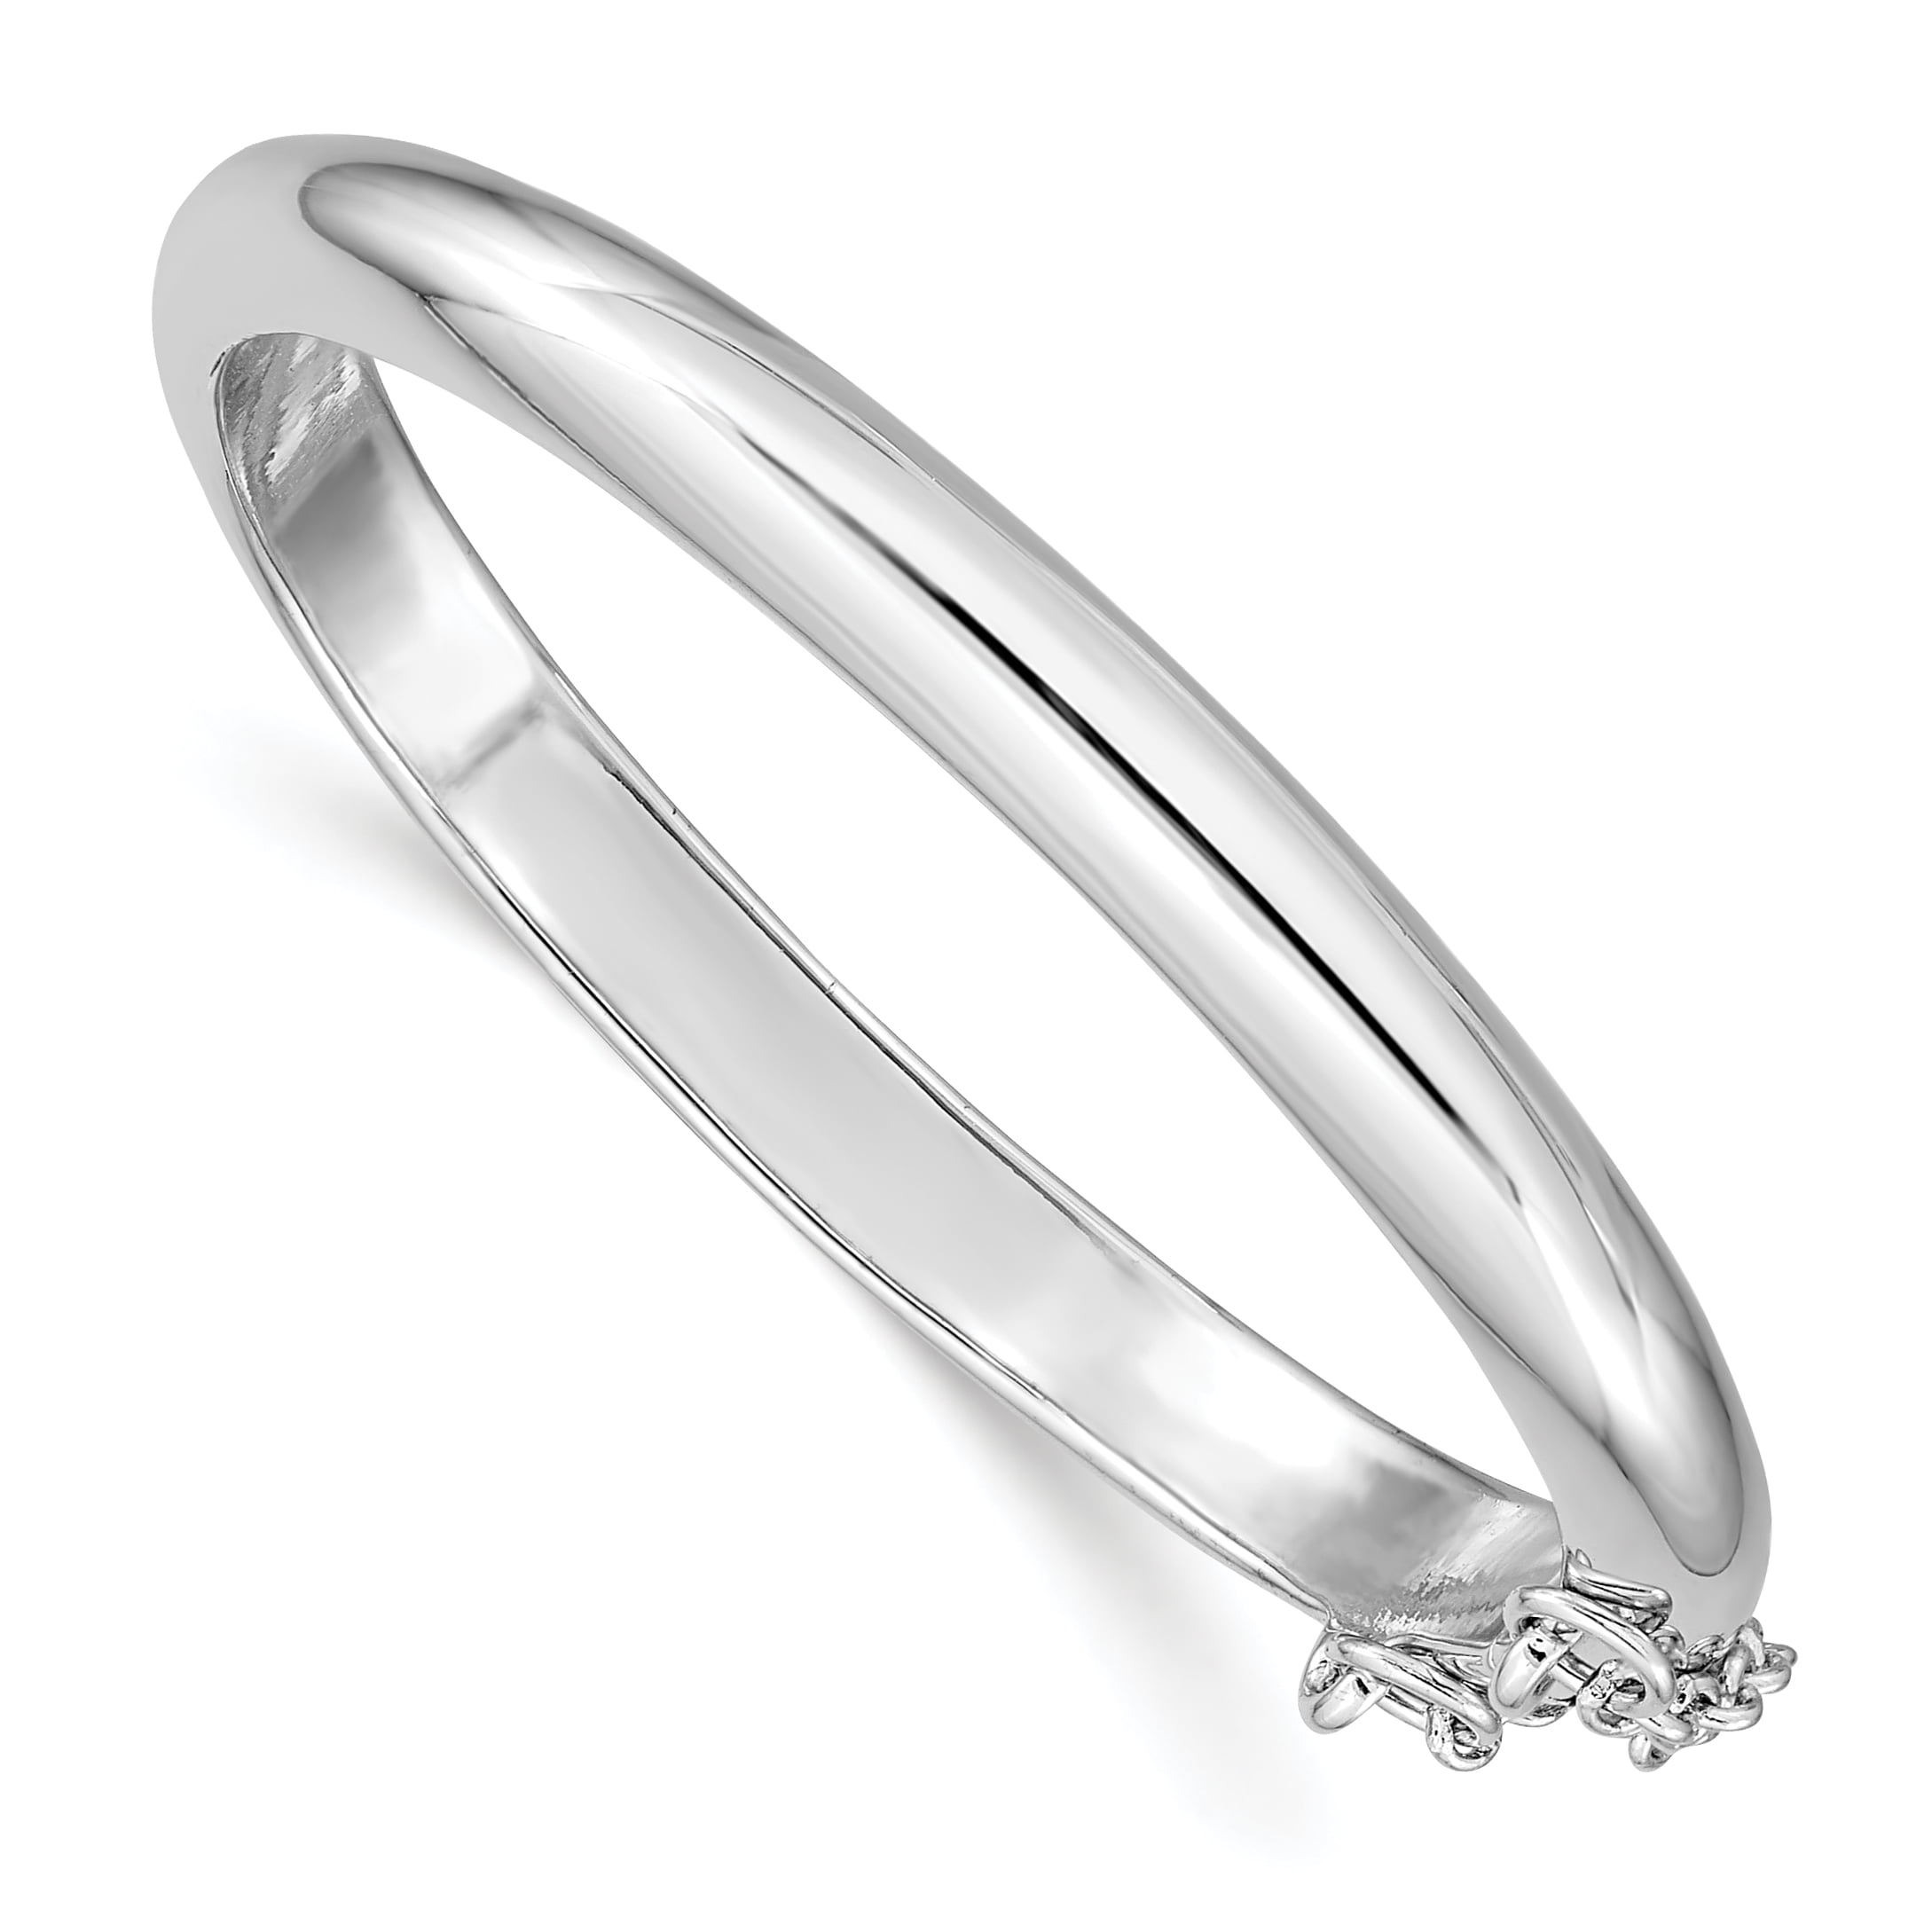 925 Sterling Silver Hollow Hinged Polished Flat back 10.25mm Cuff Stackable Bangle Bracelet Jewelry Gifts for Women